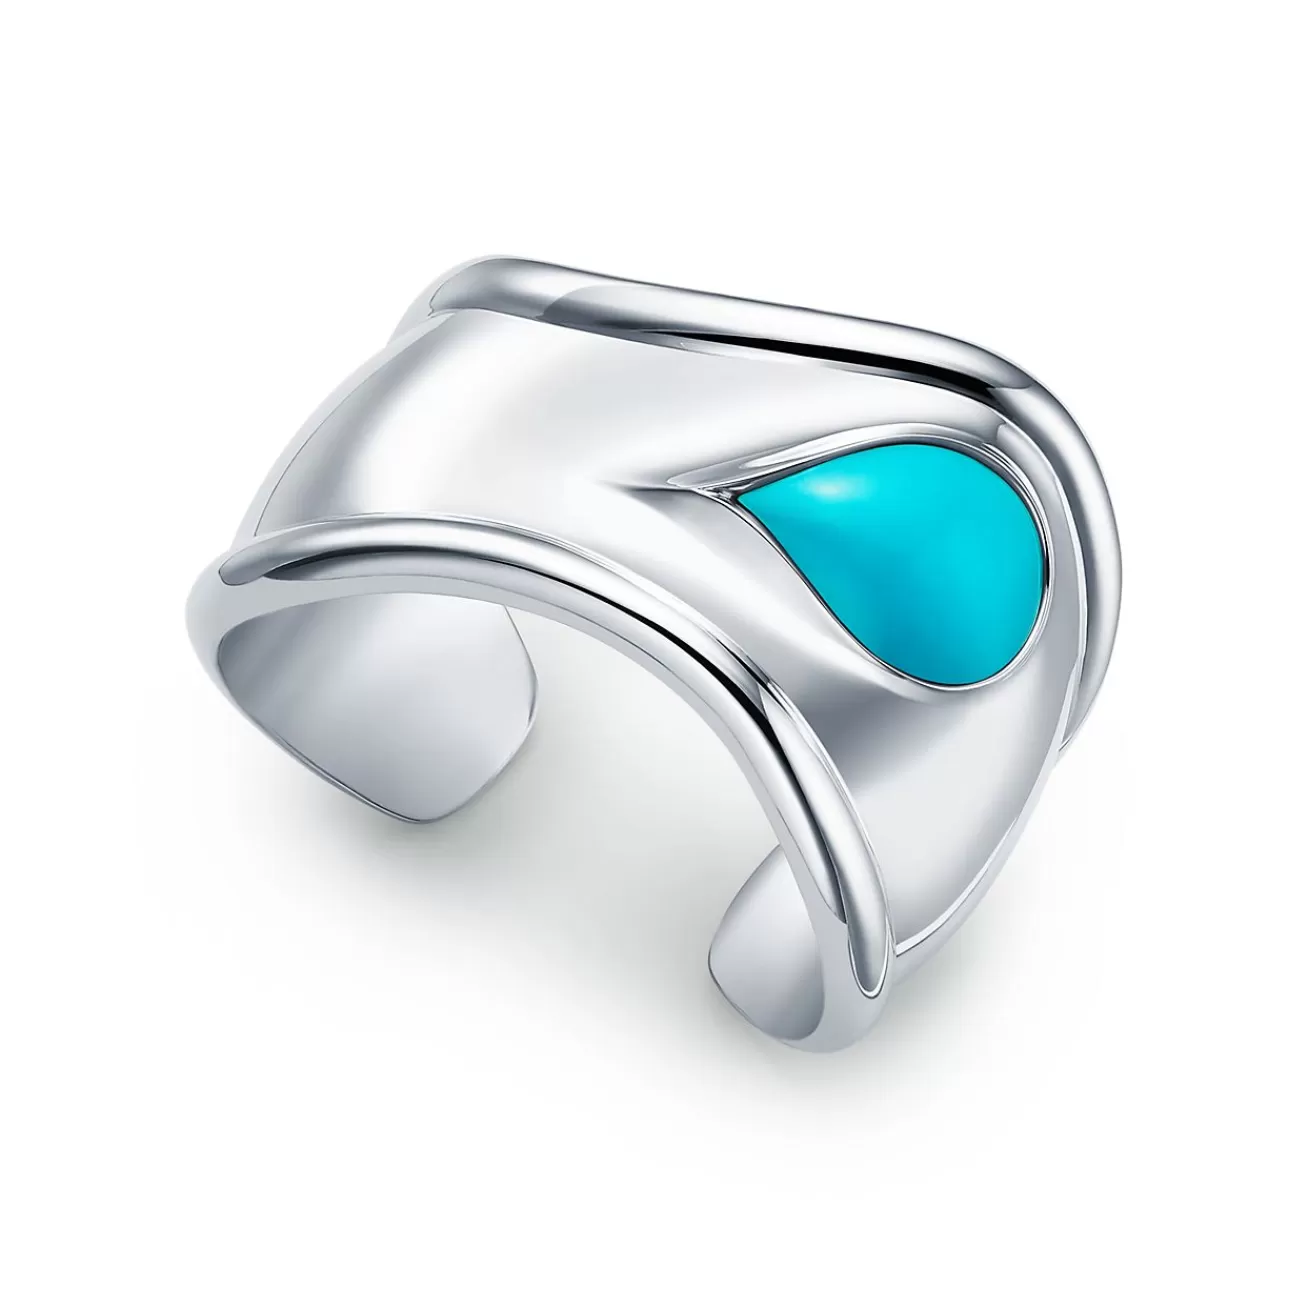 Tiffany & Co. Elsa Peretti® small Bone cuff in sterling silver with turquoise, 43 mm wide. | ^ Bracelets | Colored Gemstone Jewelry